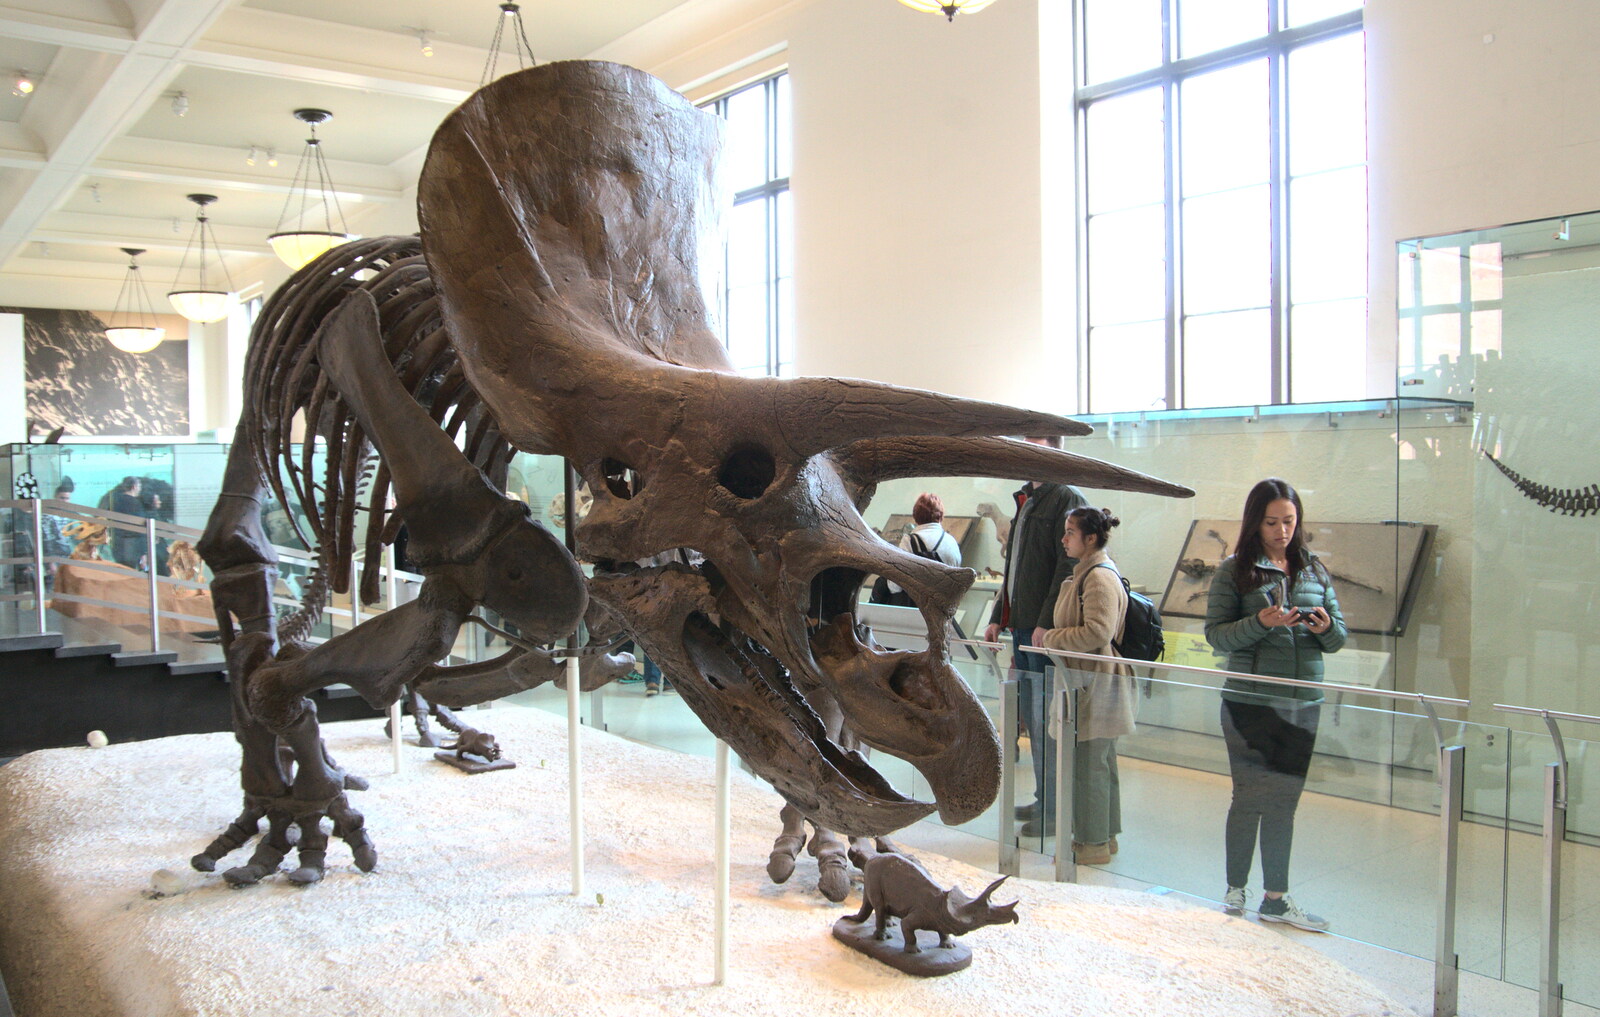 A Triceratops fossil skeleton from Open-top Buses and a Day at the Museum, New York, United States - 22nd October 2018